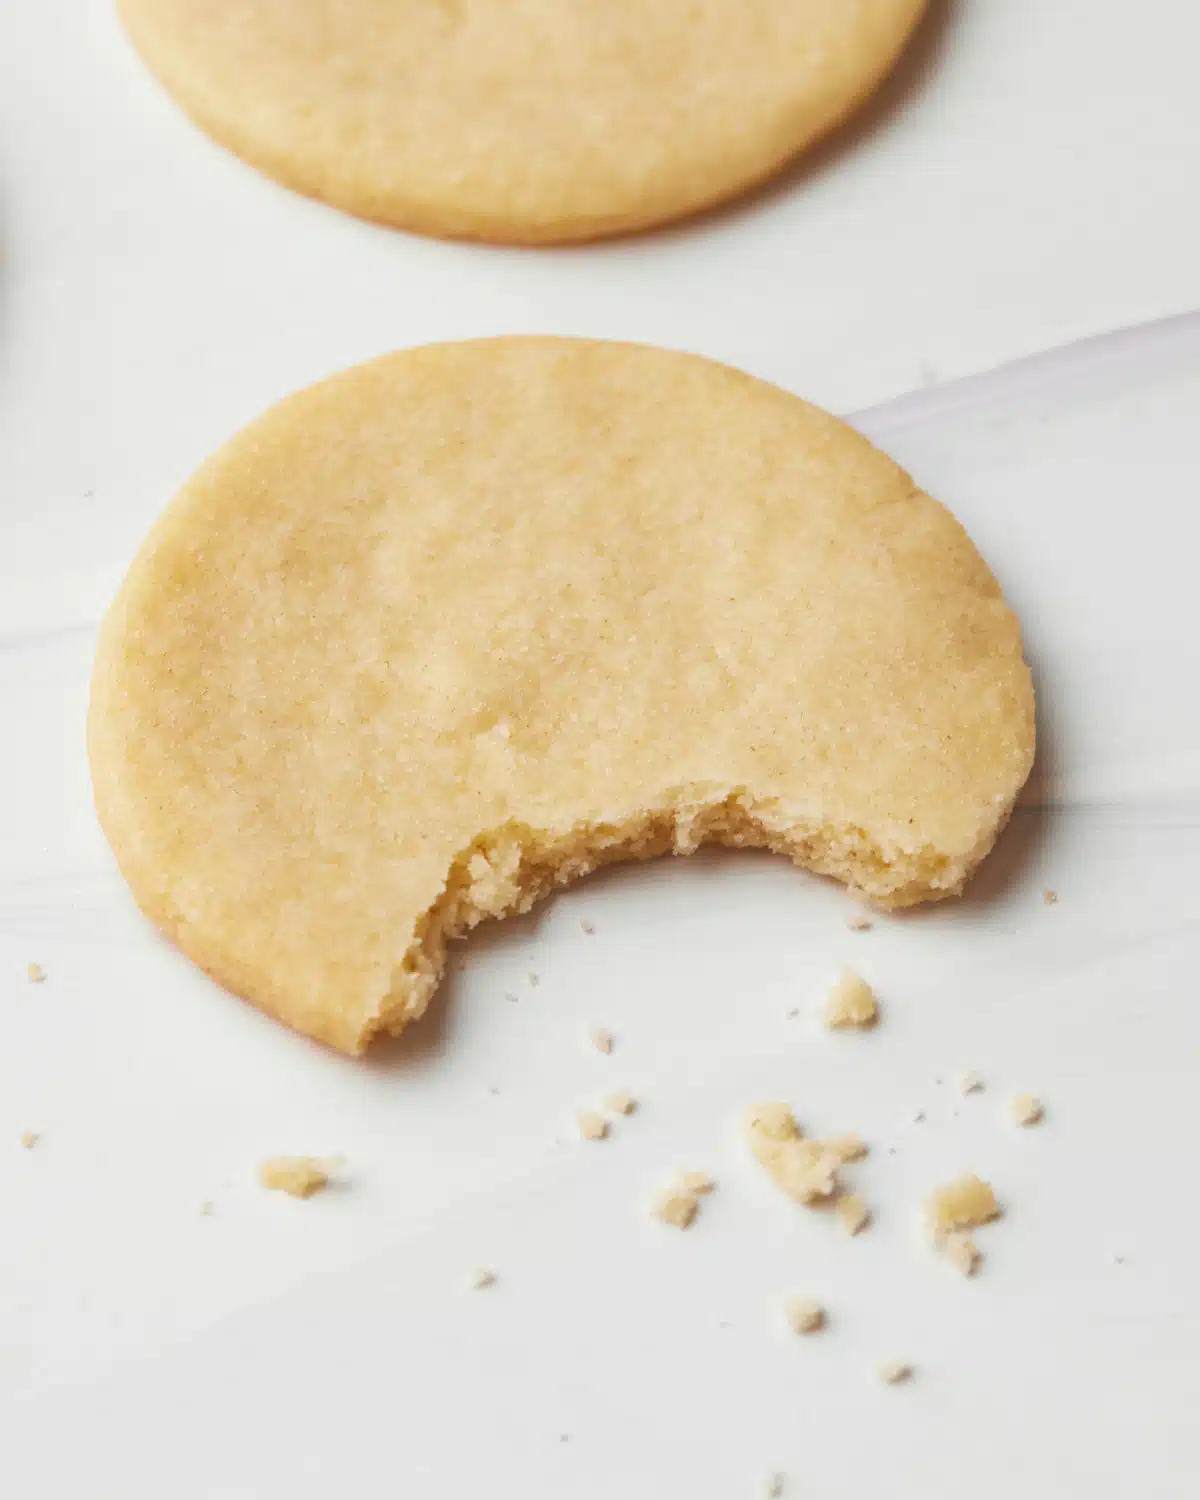 Sugar cookie with a bite taken out of it and crumbs next to it.